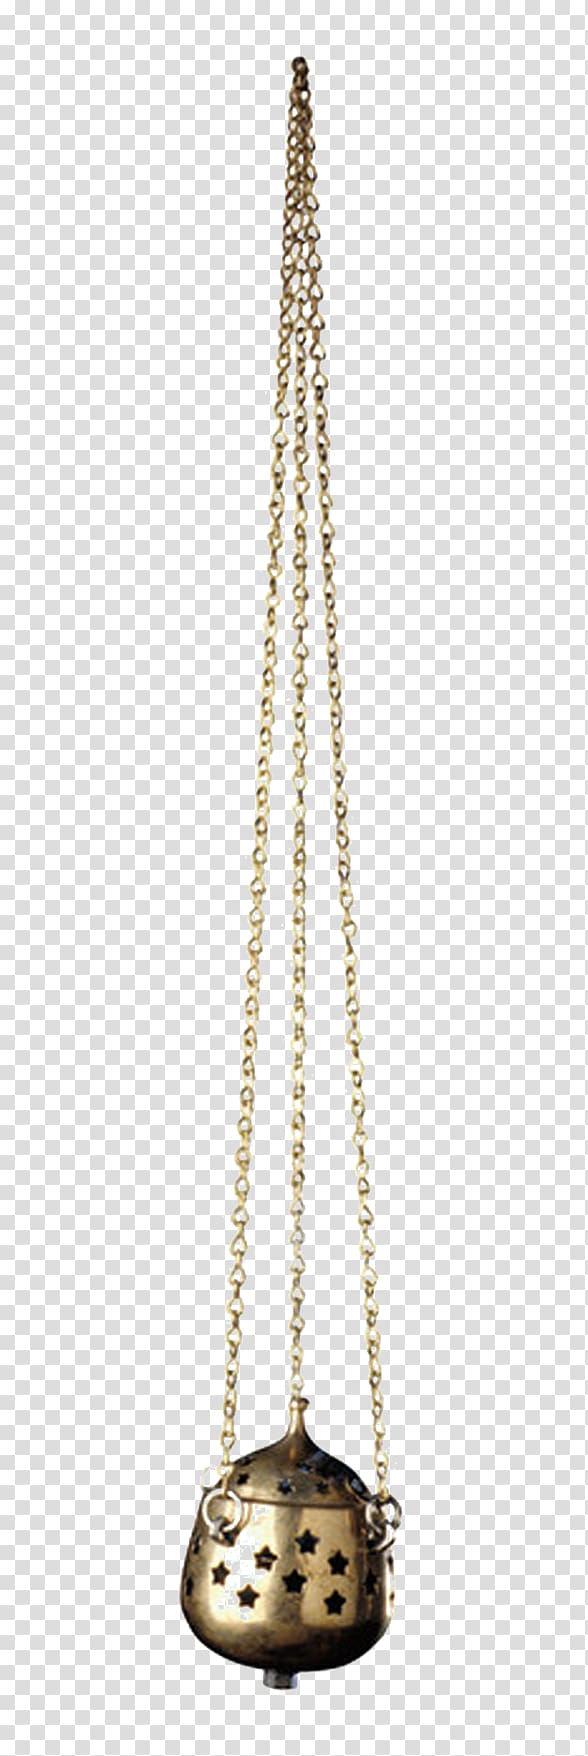 Metal Chain Google s, Metallic chain transparent background PNG clipart